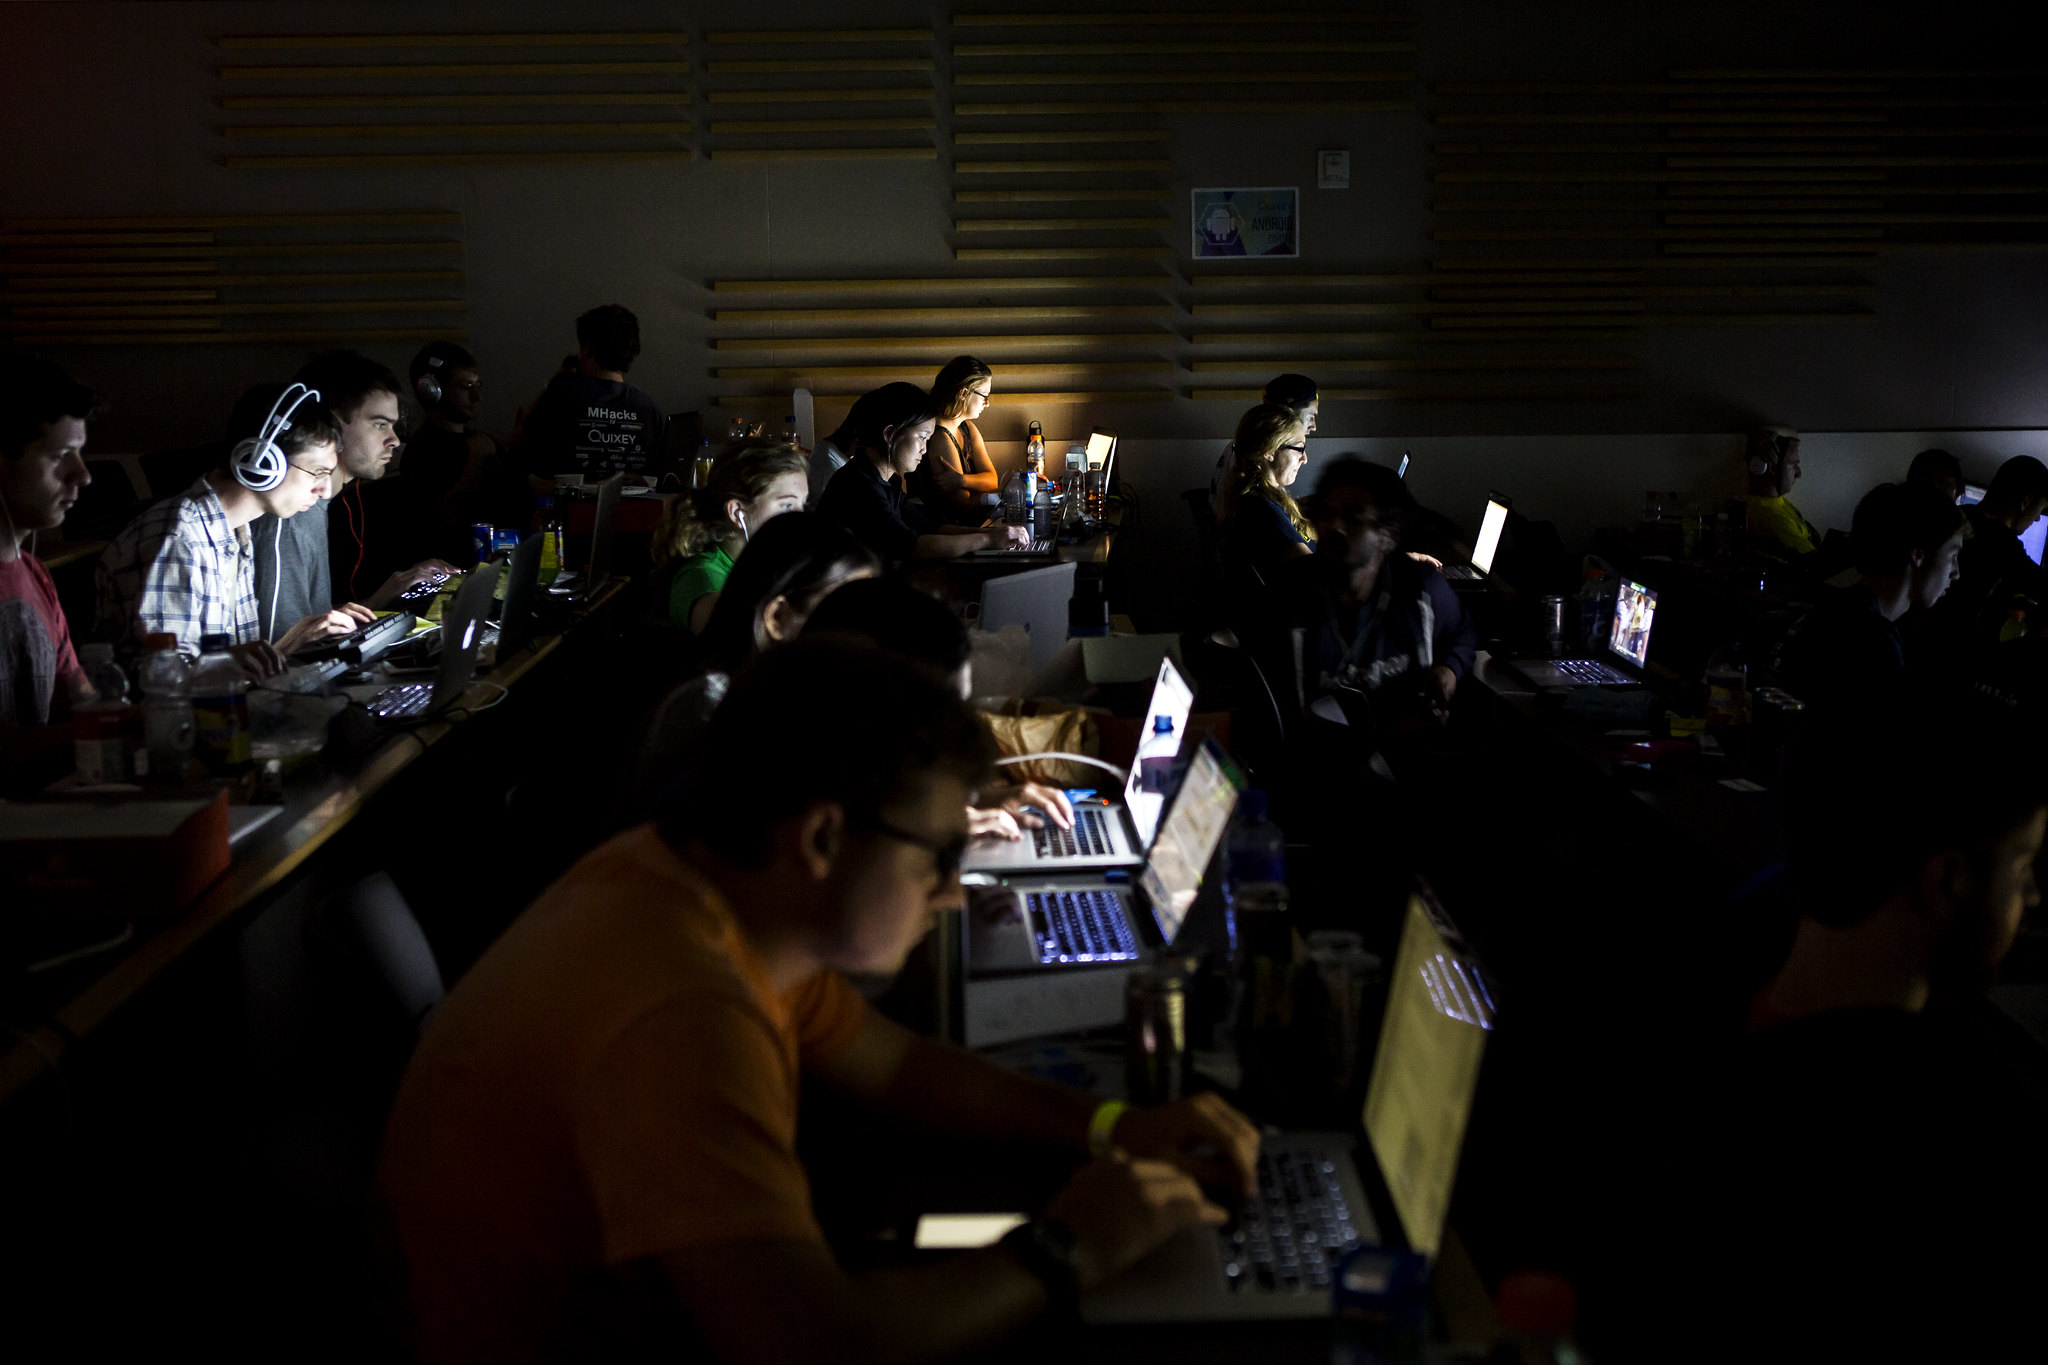 Rows of students in a lecture hall in the dark, their faces lit by their computer screens.